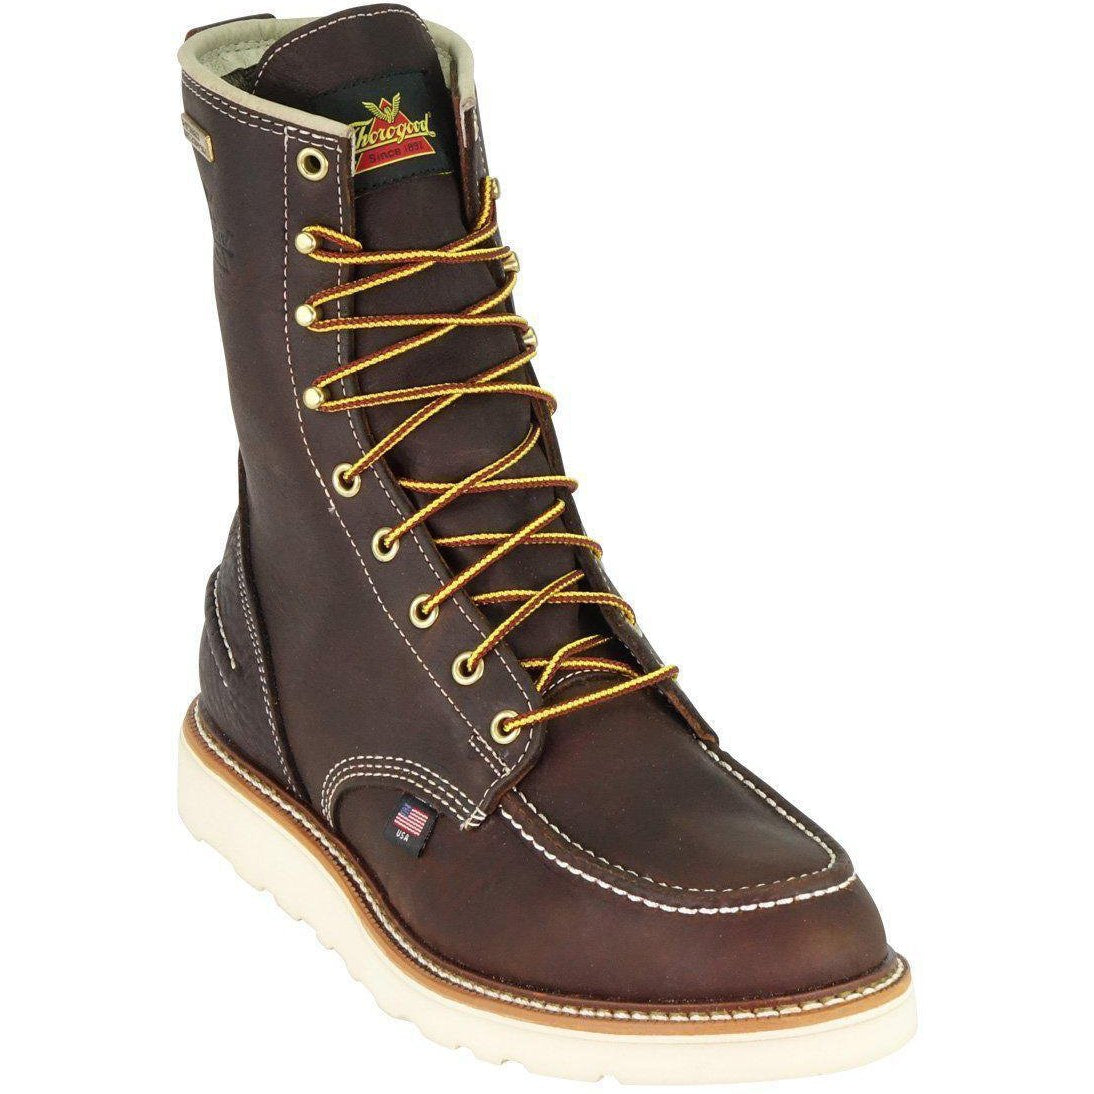 Thorogood Men's USA Made 1957 8" Moc Toe WP Wedge Work Boot Brown 814-3800  - Overlook Boots